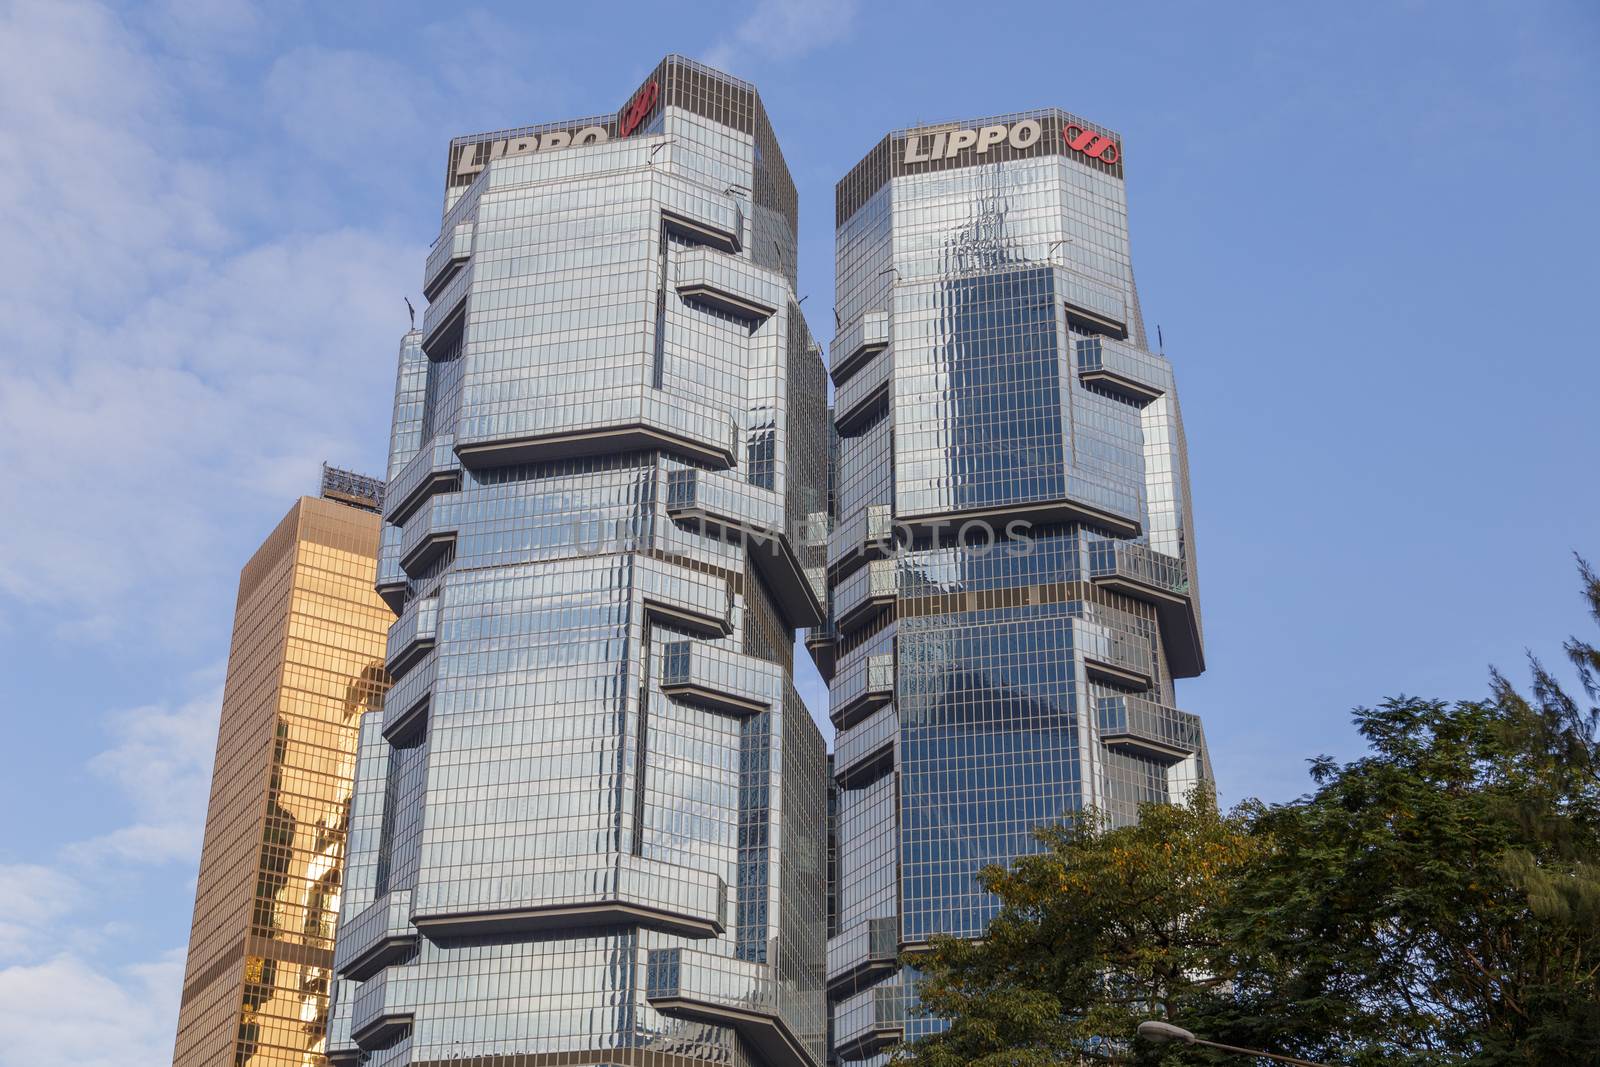 HongKong, China - November, 2019: The Lippo centre twin towers, iconic modern architecture buildings in Hong Kong.